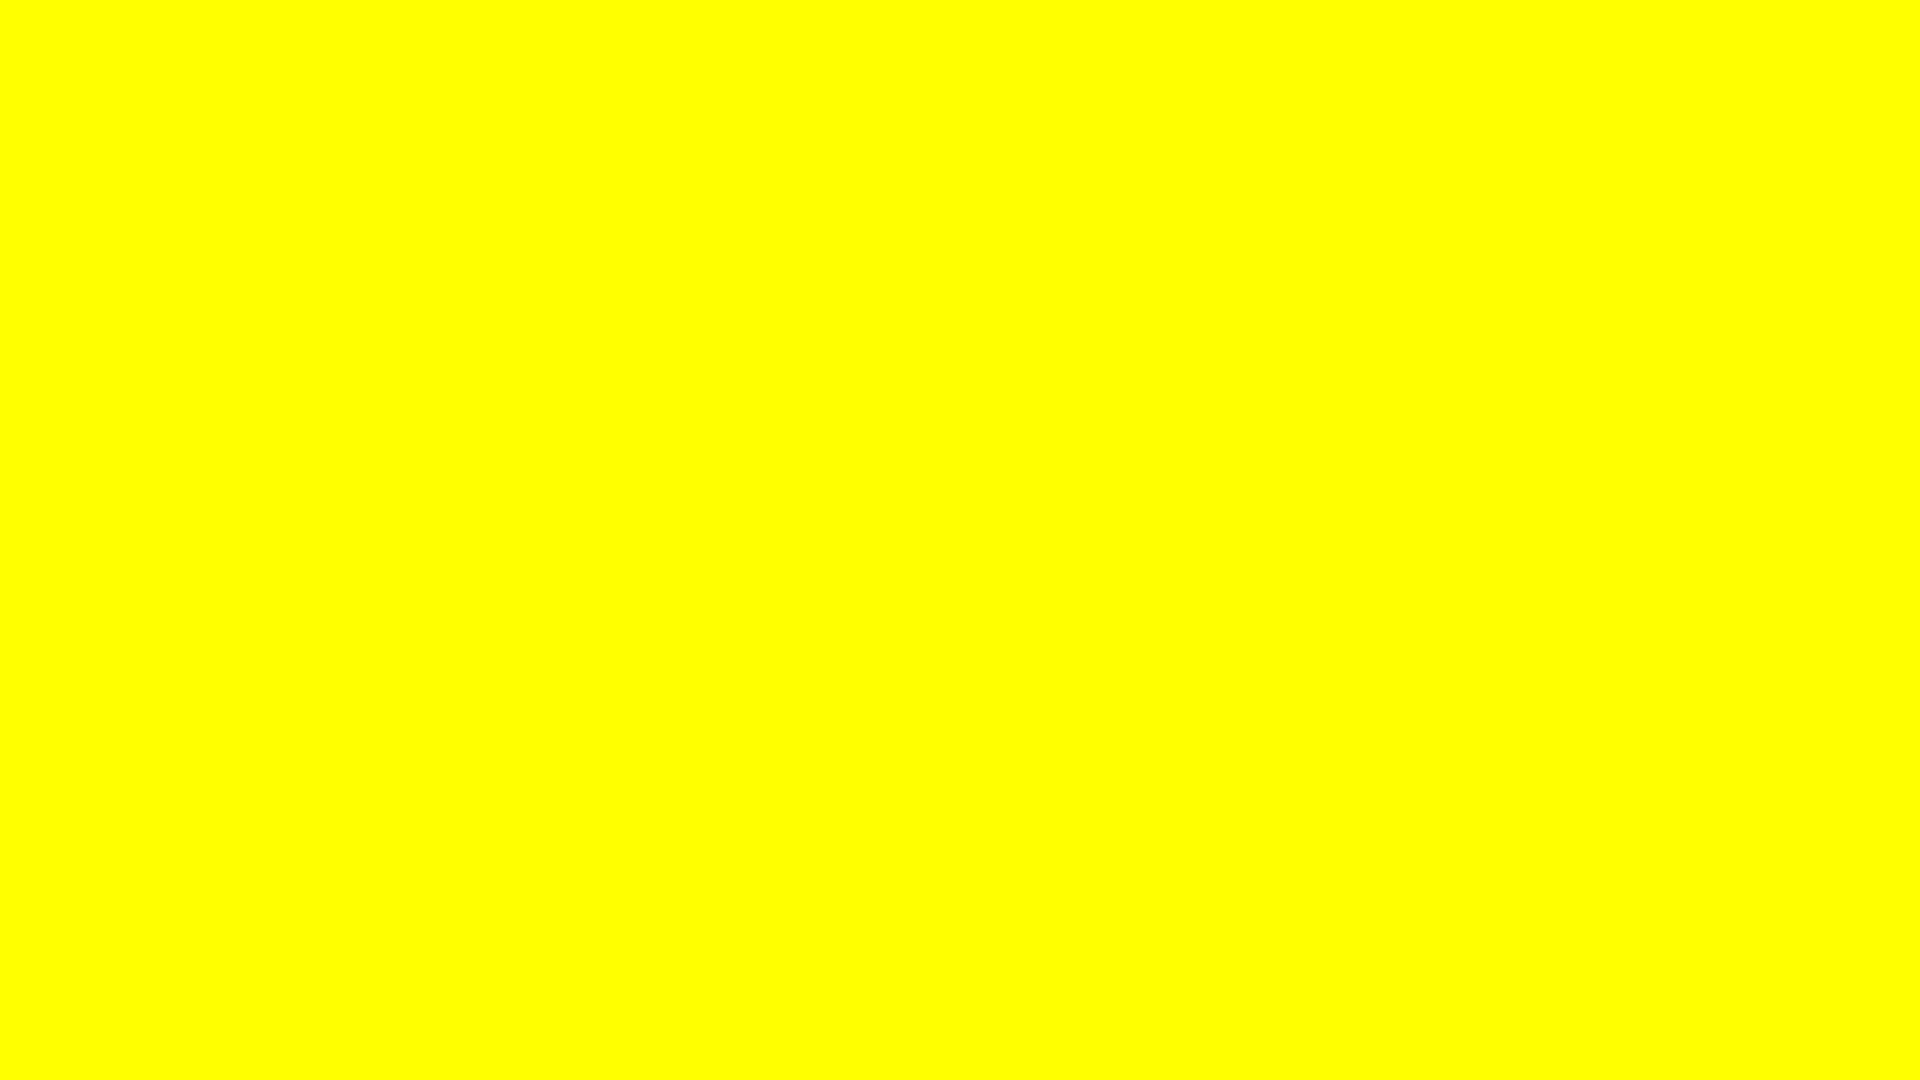 Brighten your day with this cute yellow background!